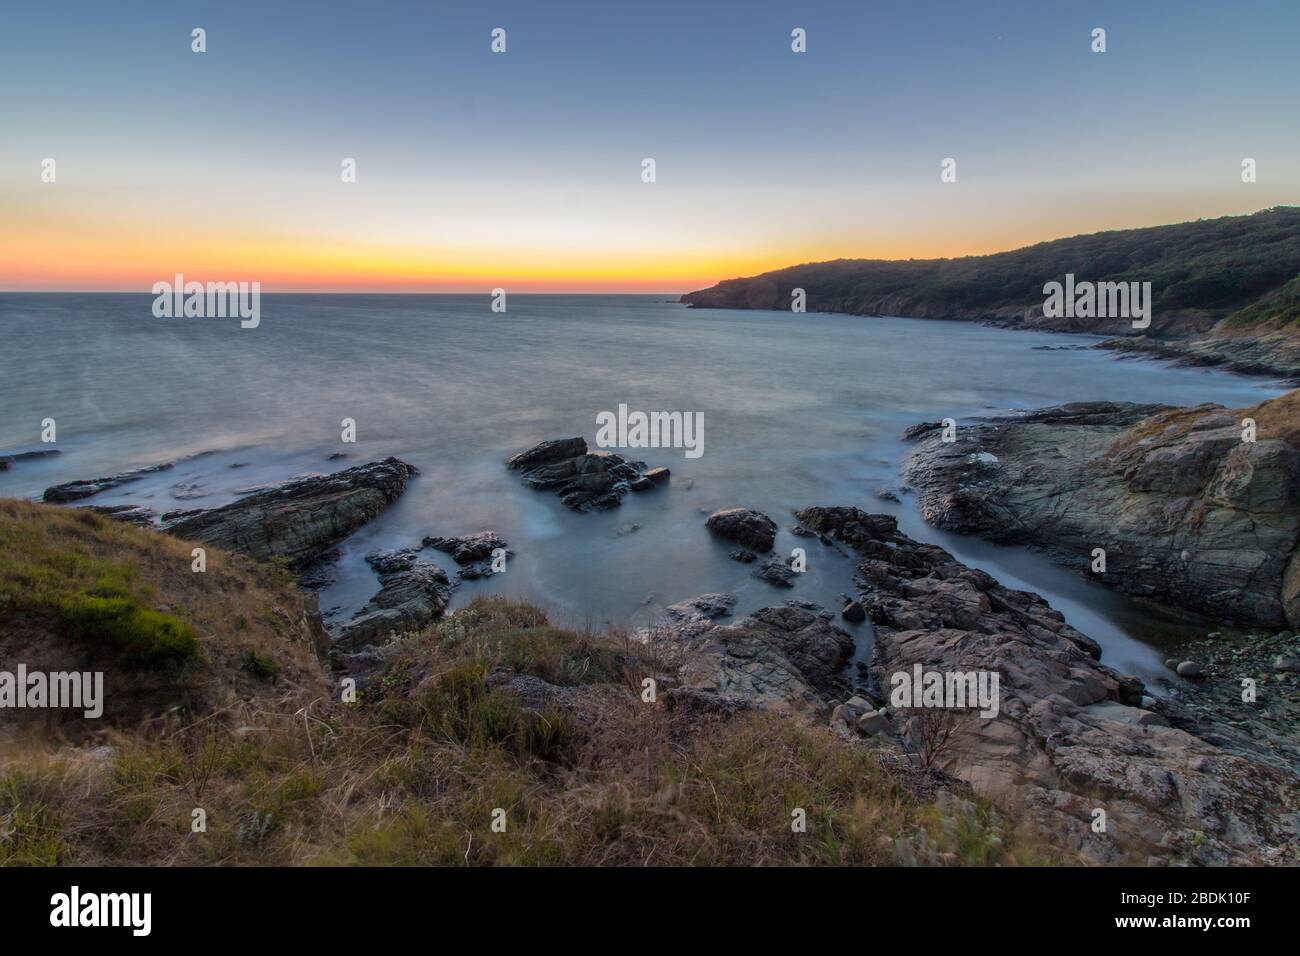 Nice and peaceful sunrise colors by the sea. Stock Photo